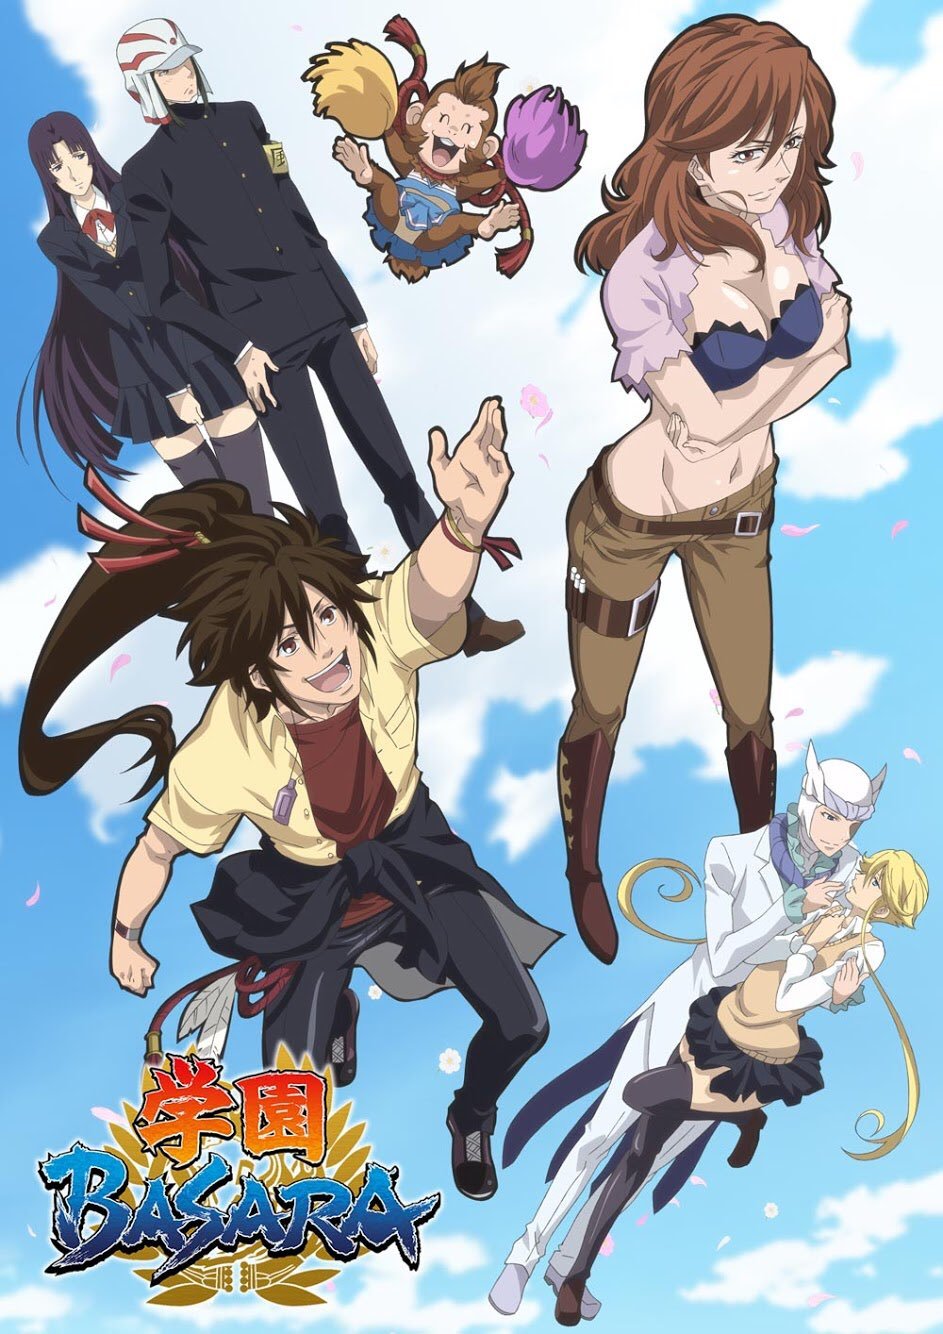 A new key visual and additional cast for the âGakuen Basaraâ TV anime is now available. Broadcast begins October 4th. -Staff-â¢ Director: Minoru Ohara â¢ Series Composition: Kouji Miura â¢ Character Design: Haruhito Takada â¢ Theme Song: Takanori...